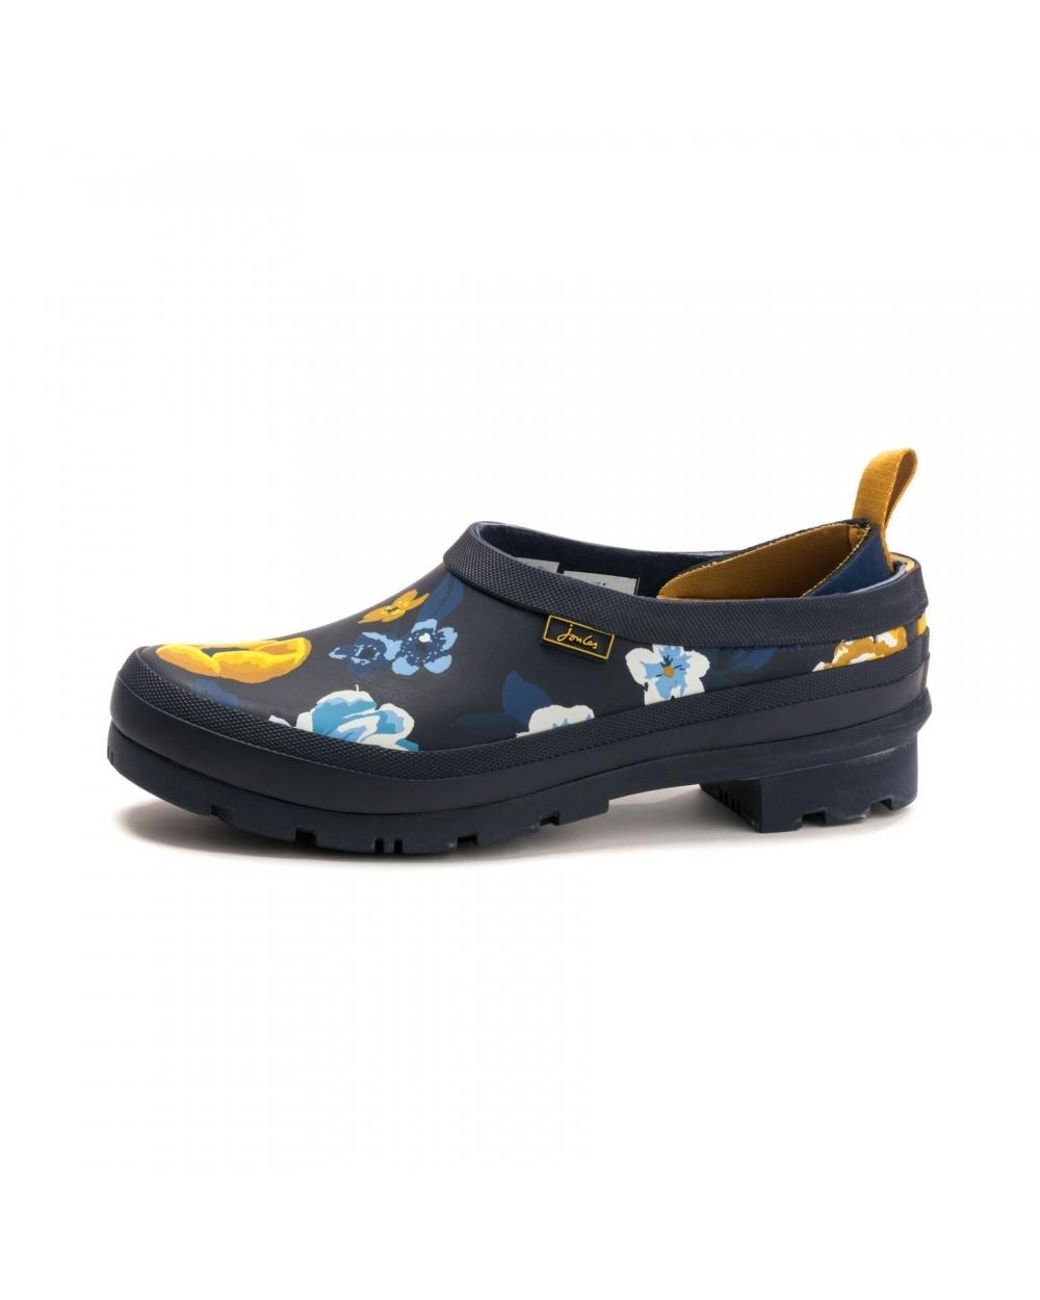 Joules Pop Slip On Welly Clog Ladybird In Navy Size UK 3-8 